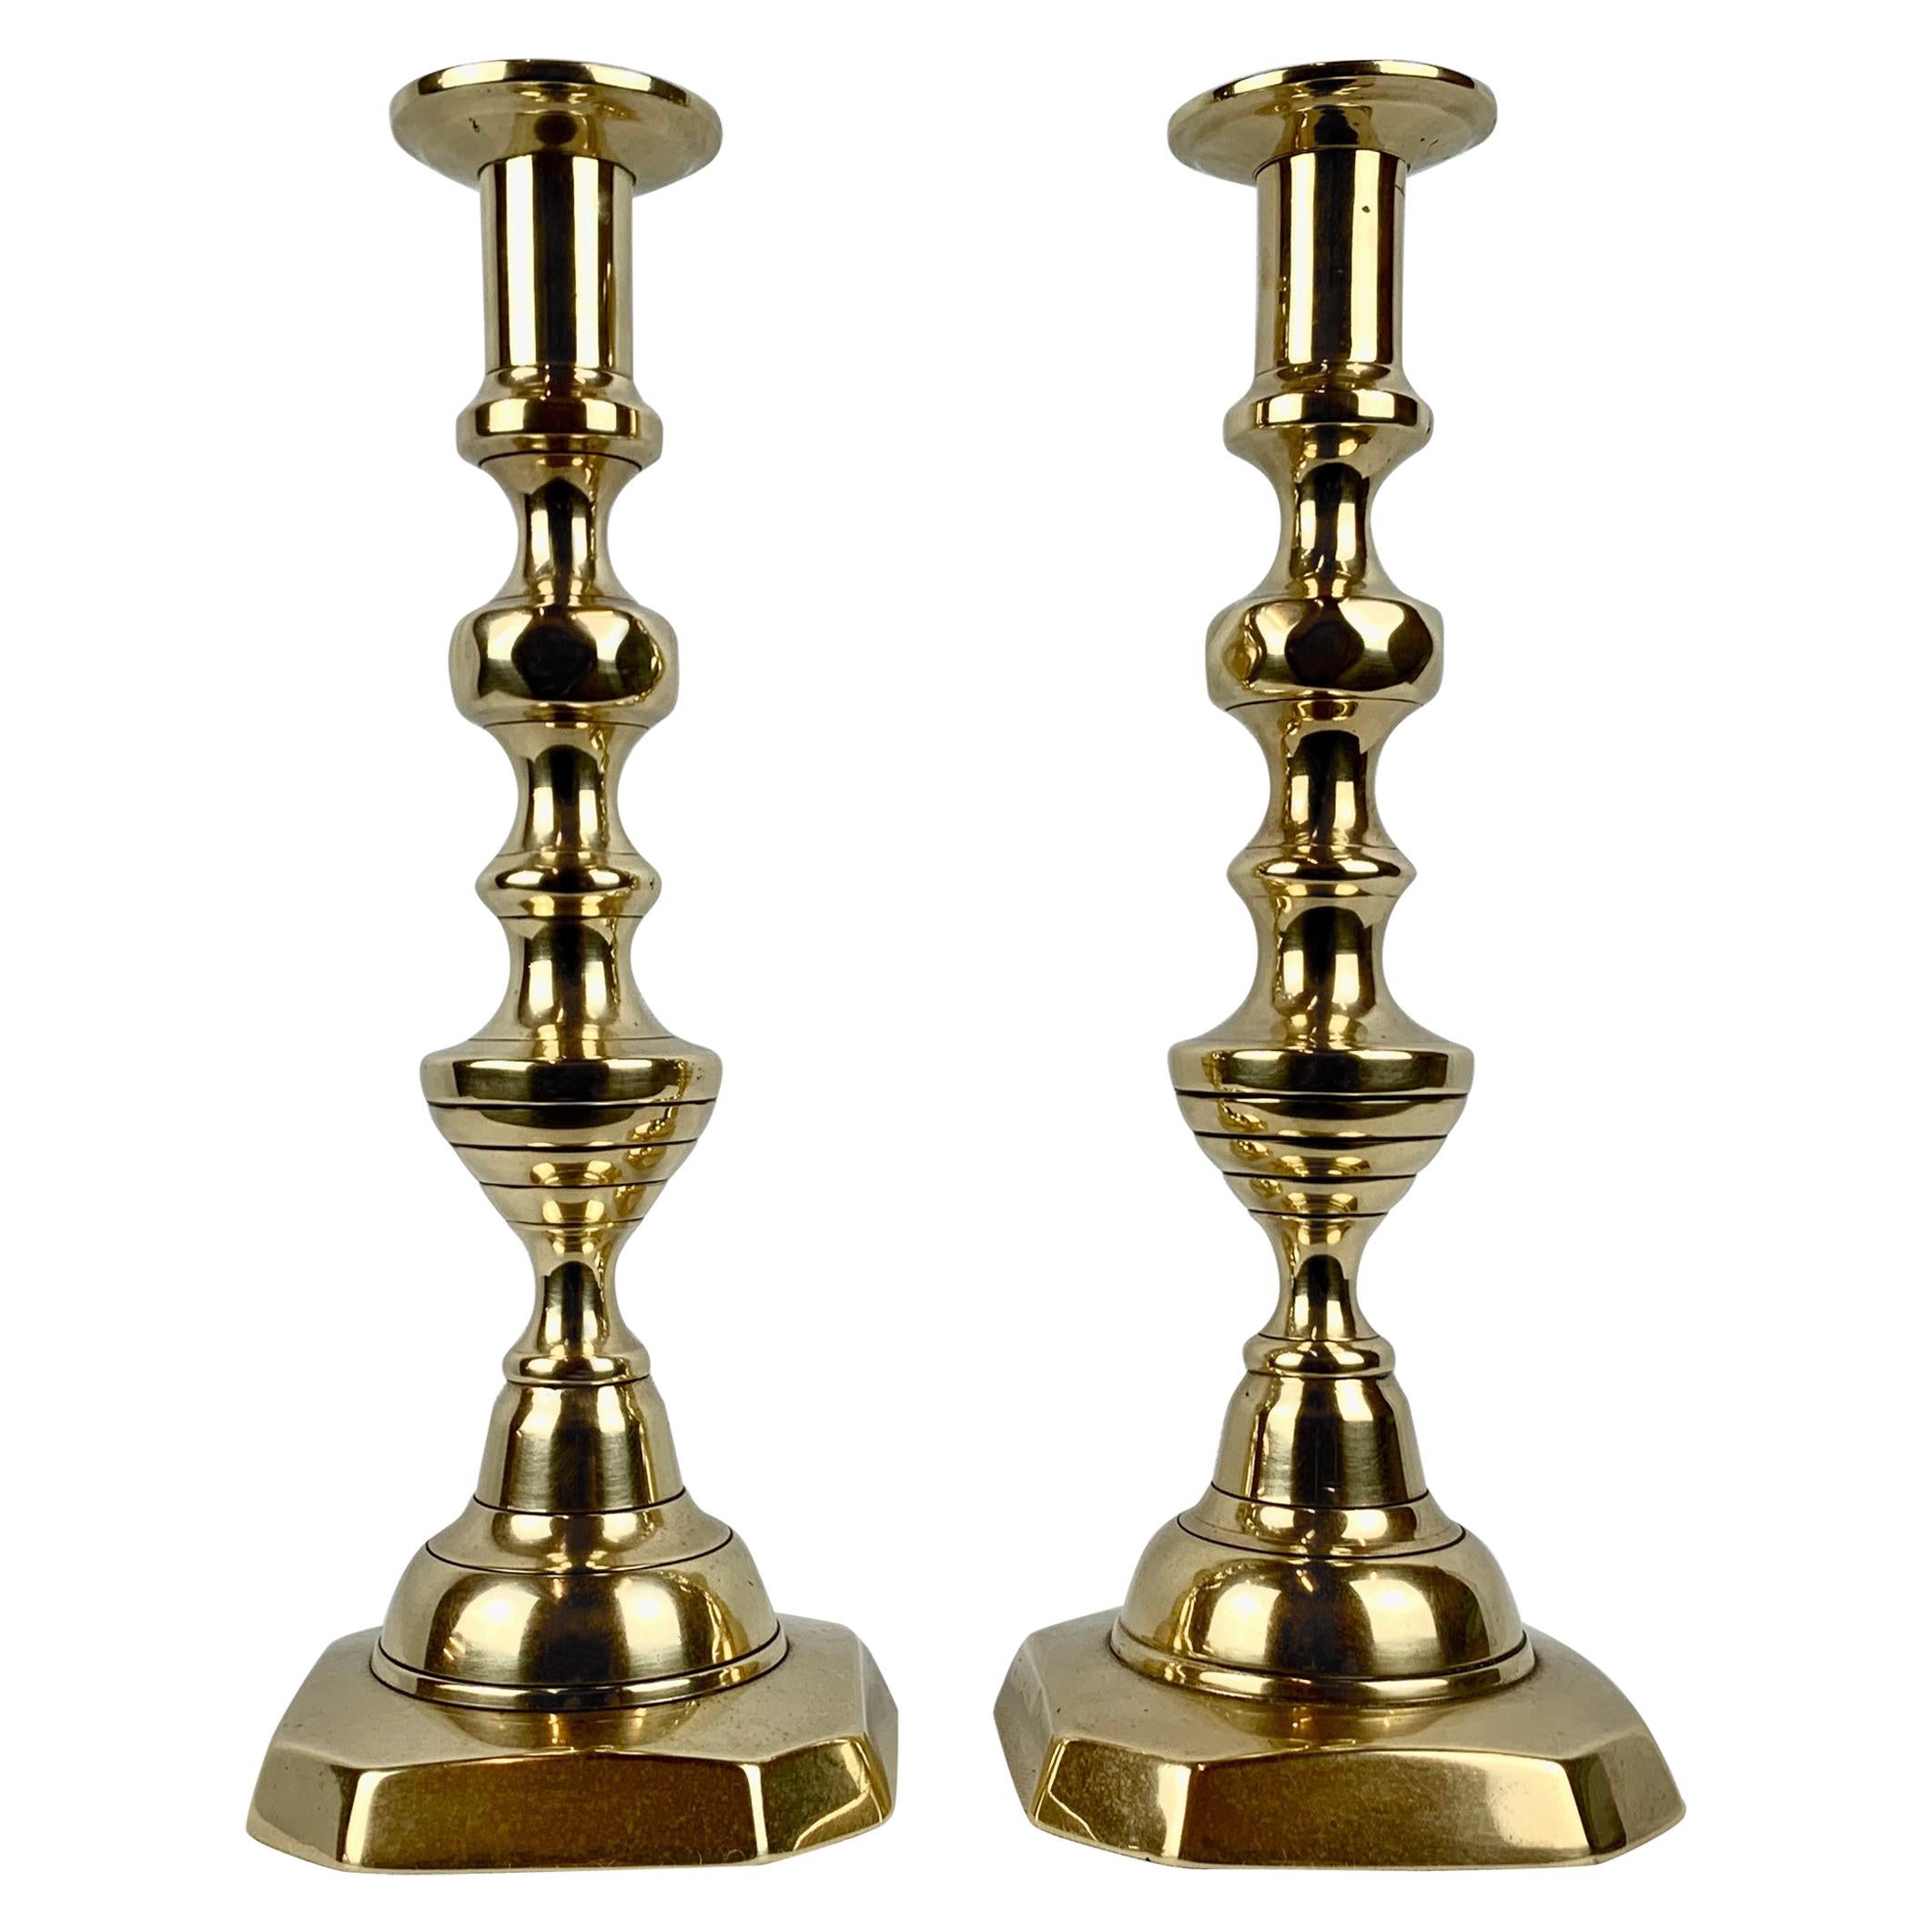 Pair of Vintage 12” Solid Brass Candlestick Holders